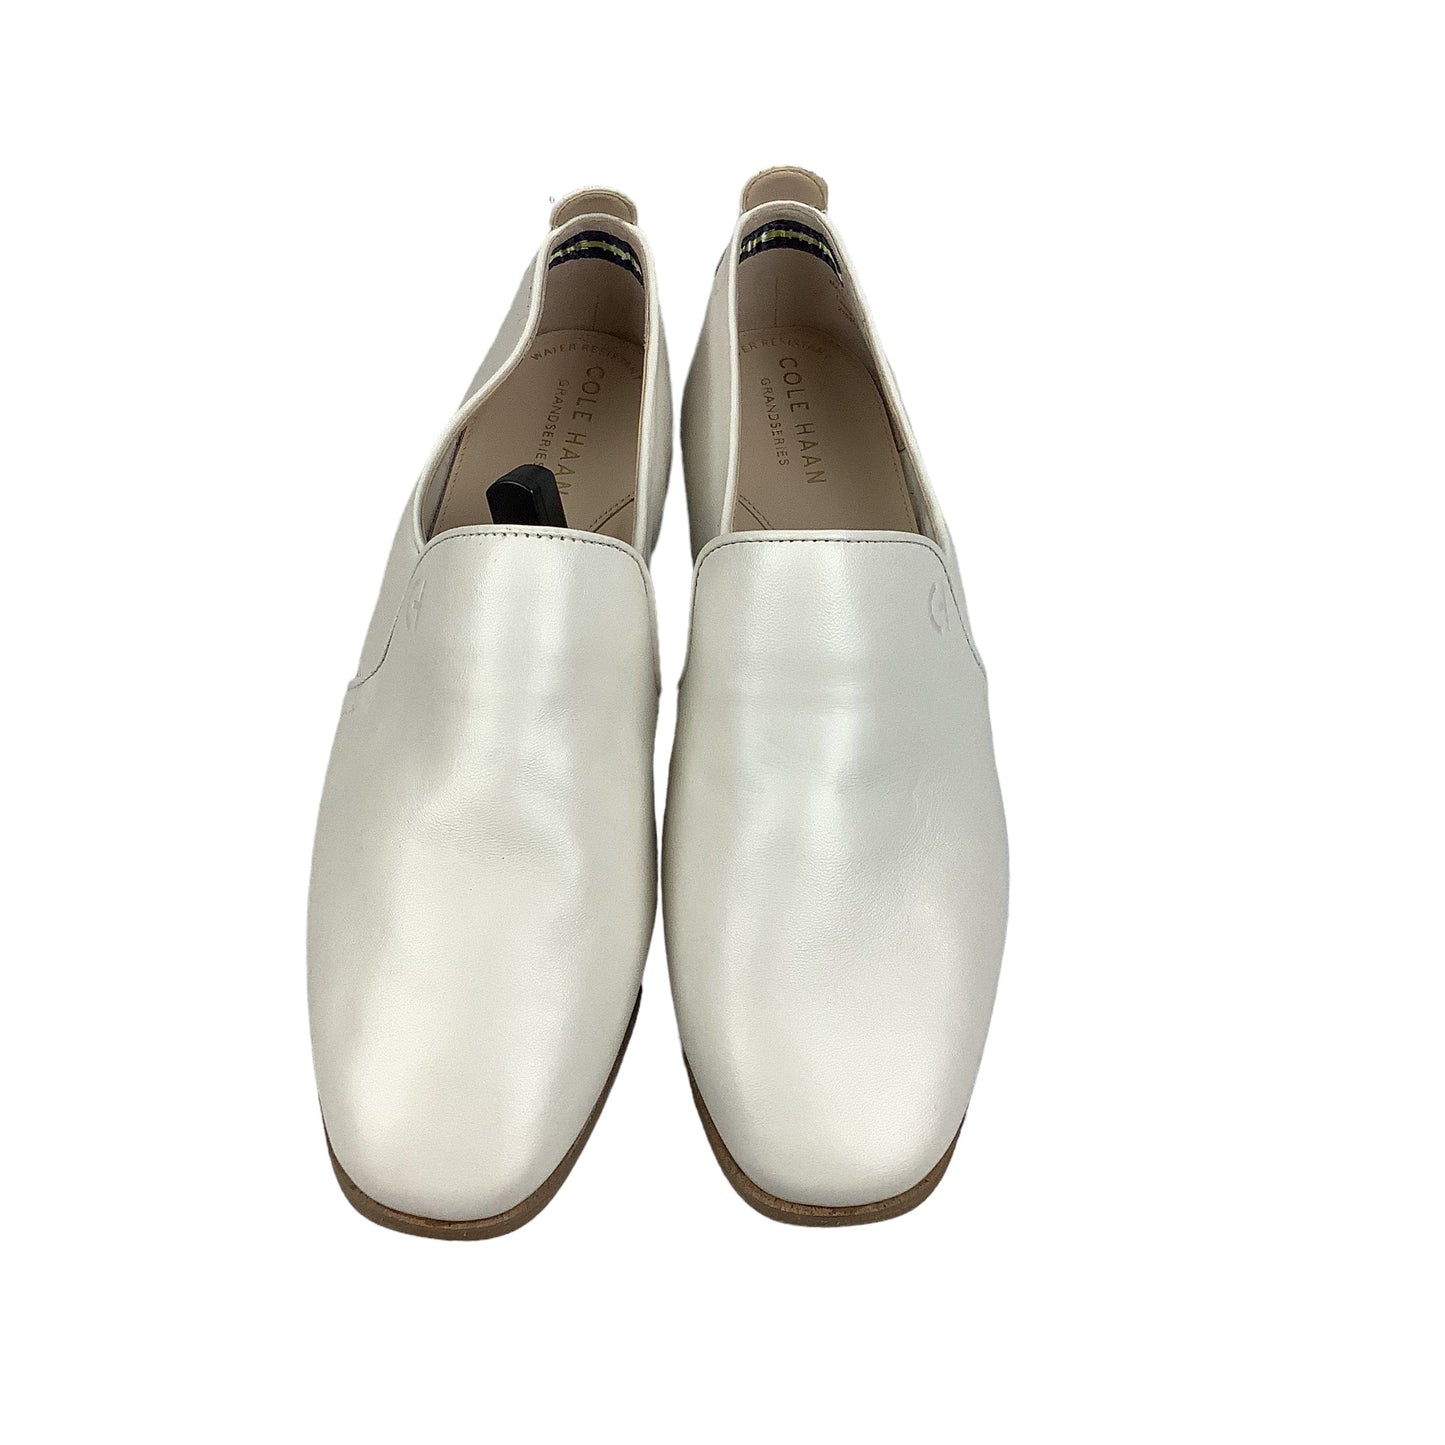 White Shoes Designer Cole-haan, Size 7